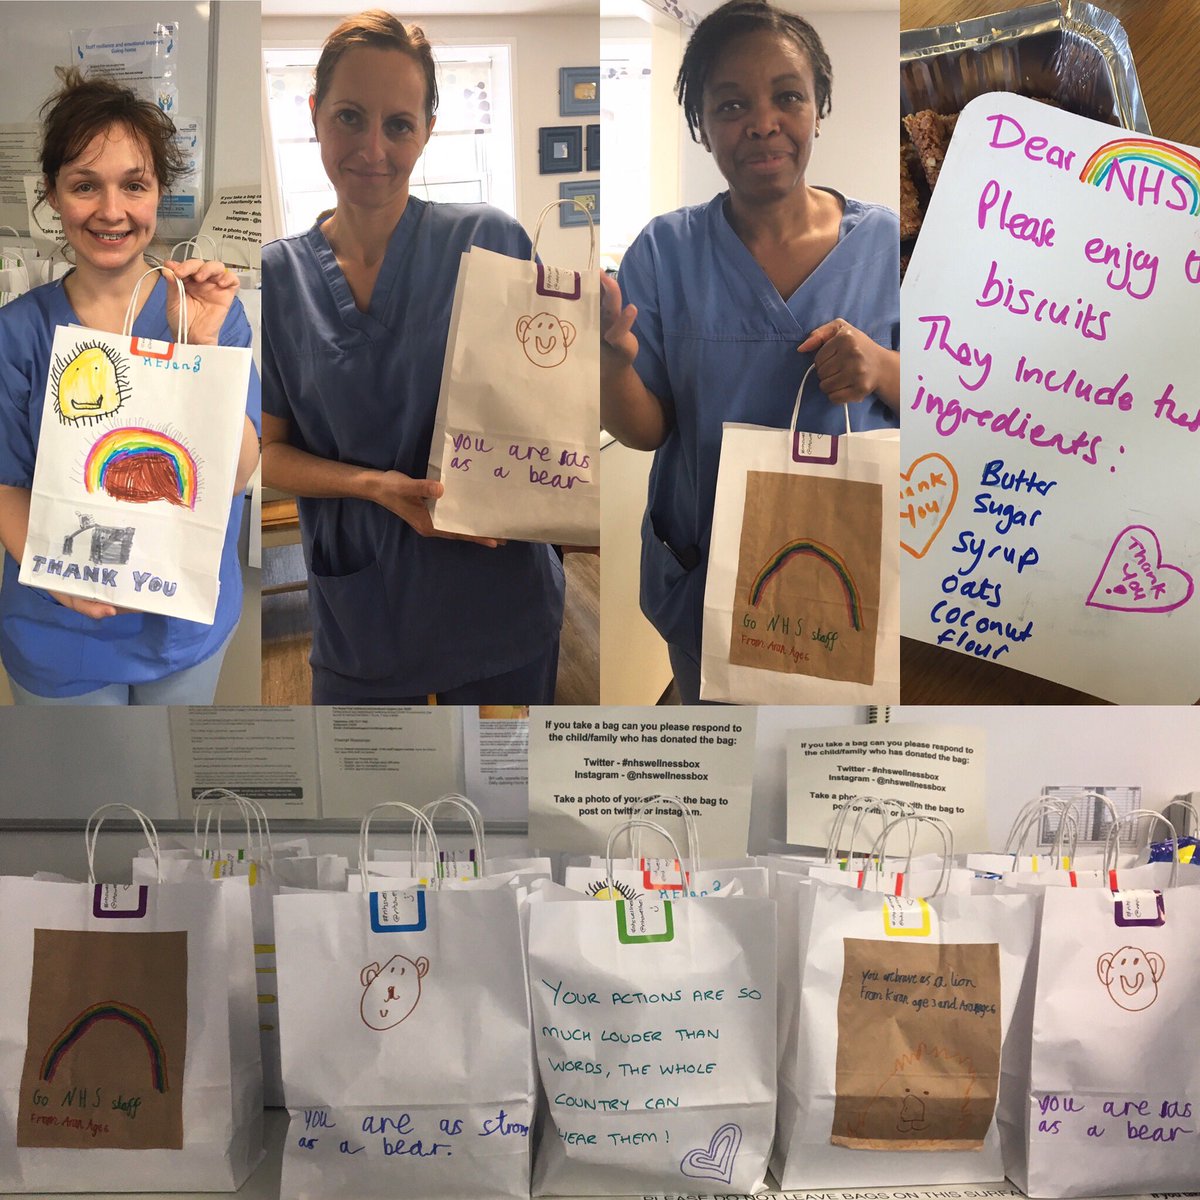 @nhswellnessbox #nhswellbeing 
THANK YOU for this lovely gifts ❗️
Special BIG 🔅THANK YOU 🔅to the children who made our welness bags very SPECIAL with their #extraordinary drawings ❗️You Are Fantastic❗️
Thank you from Trish, Lucia and Mfon 
From ITU in Barnet Hospital